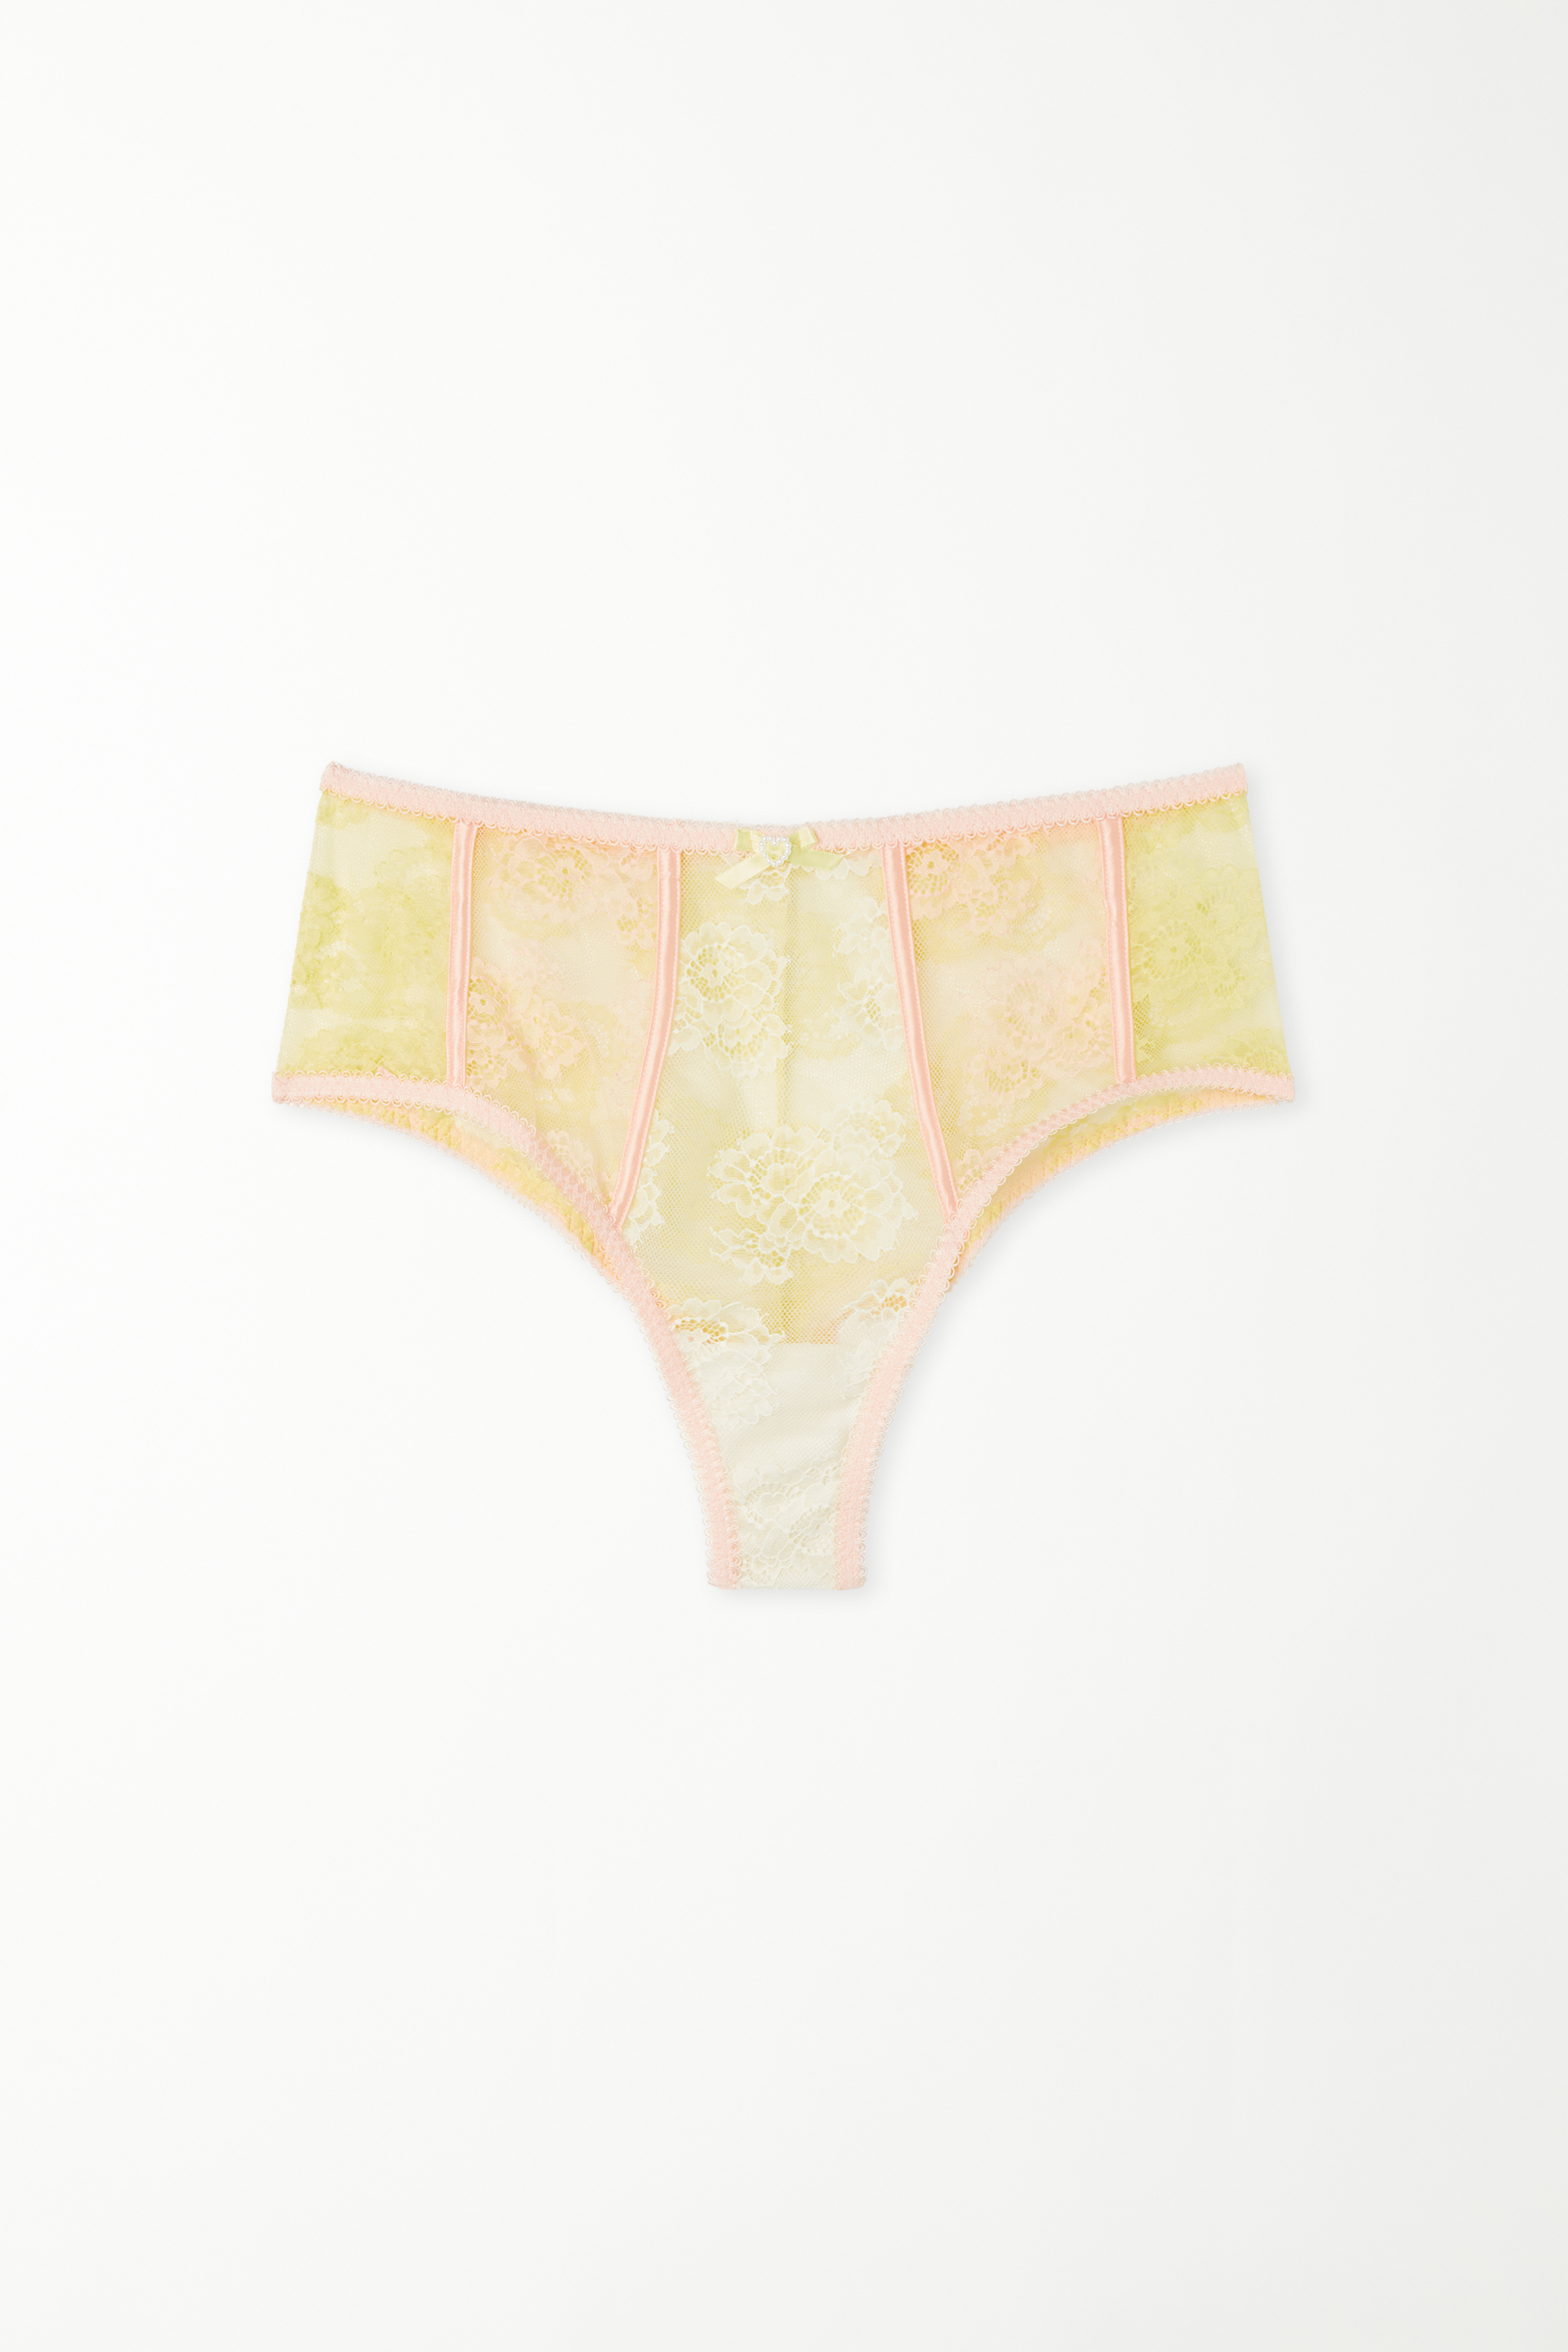 Sunset Lace High-Waist French Knickers